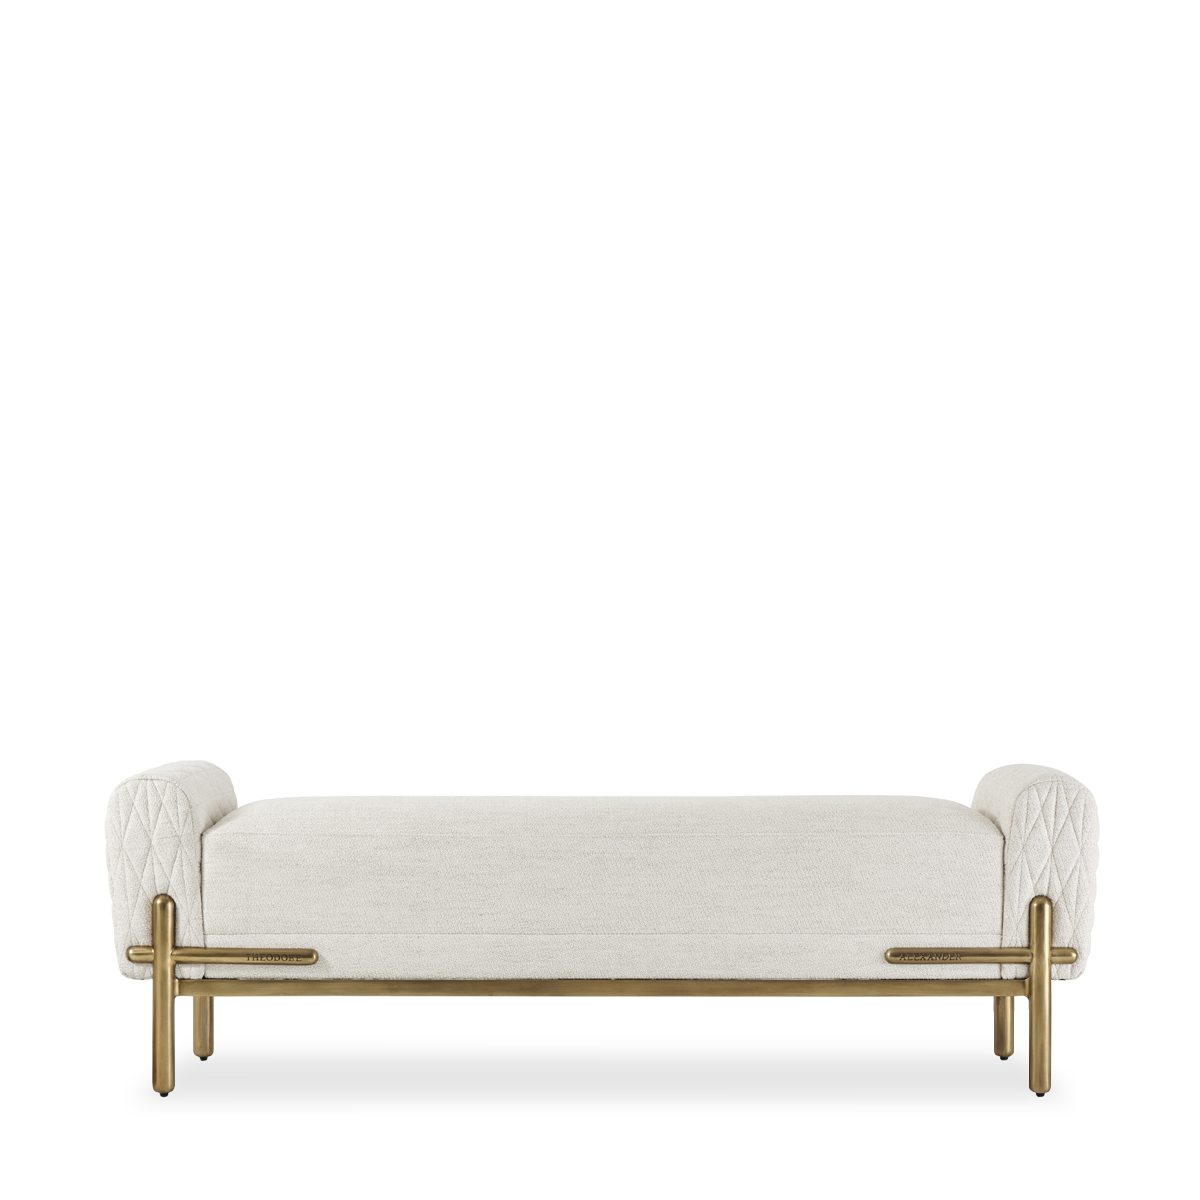 ICONIC UPHOLSTERED BENCH